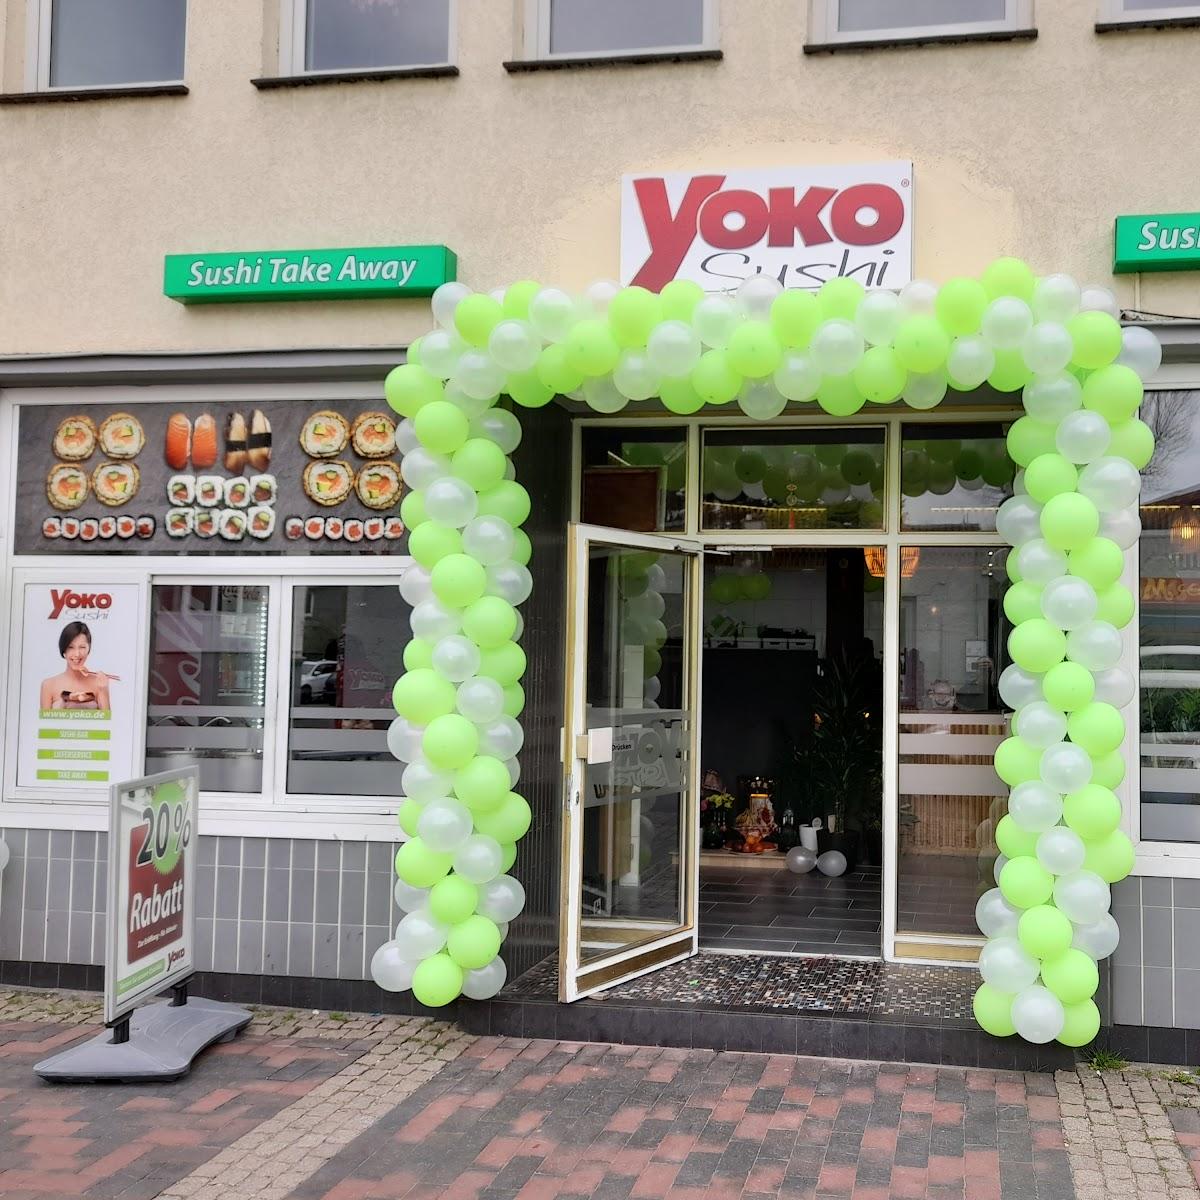 Restaurant "Yoko Sushi Lieferservice Celle" in Celle